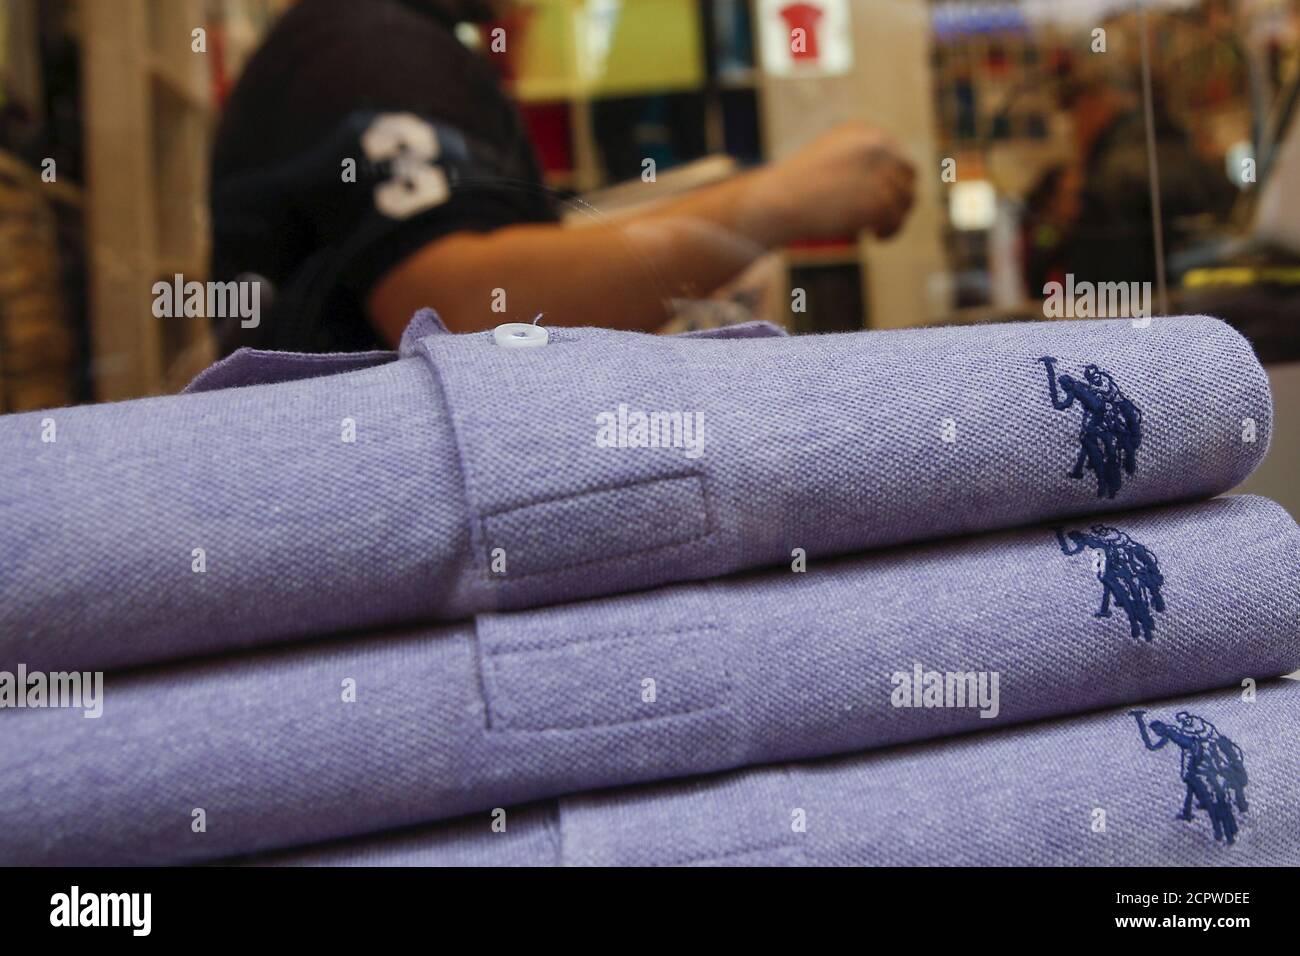 Ralph Lauren Polo High Resolution Stock Photography and Images - Alamy